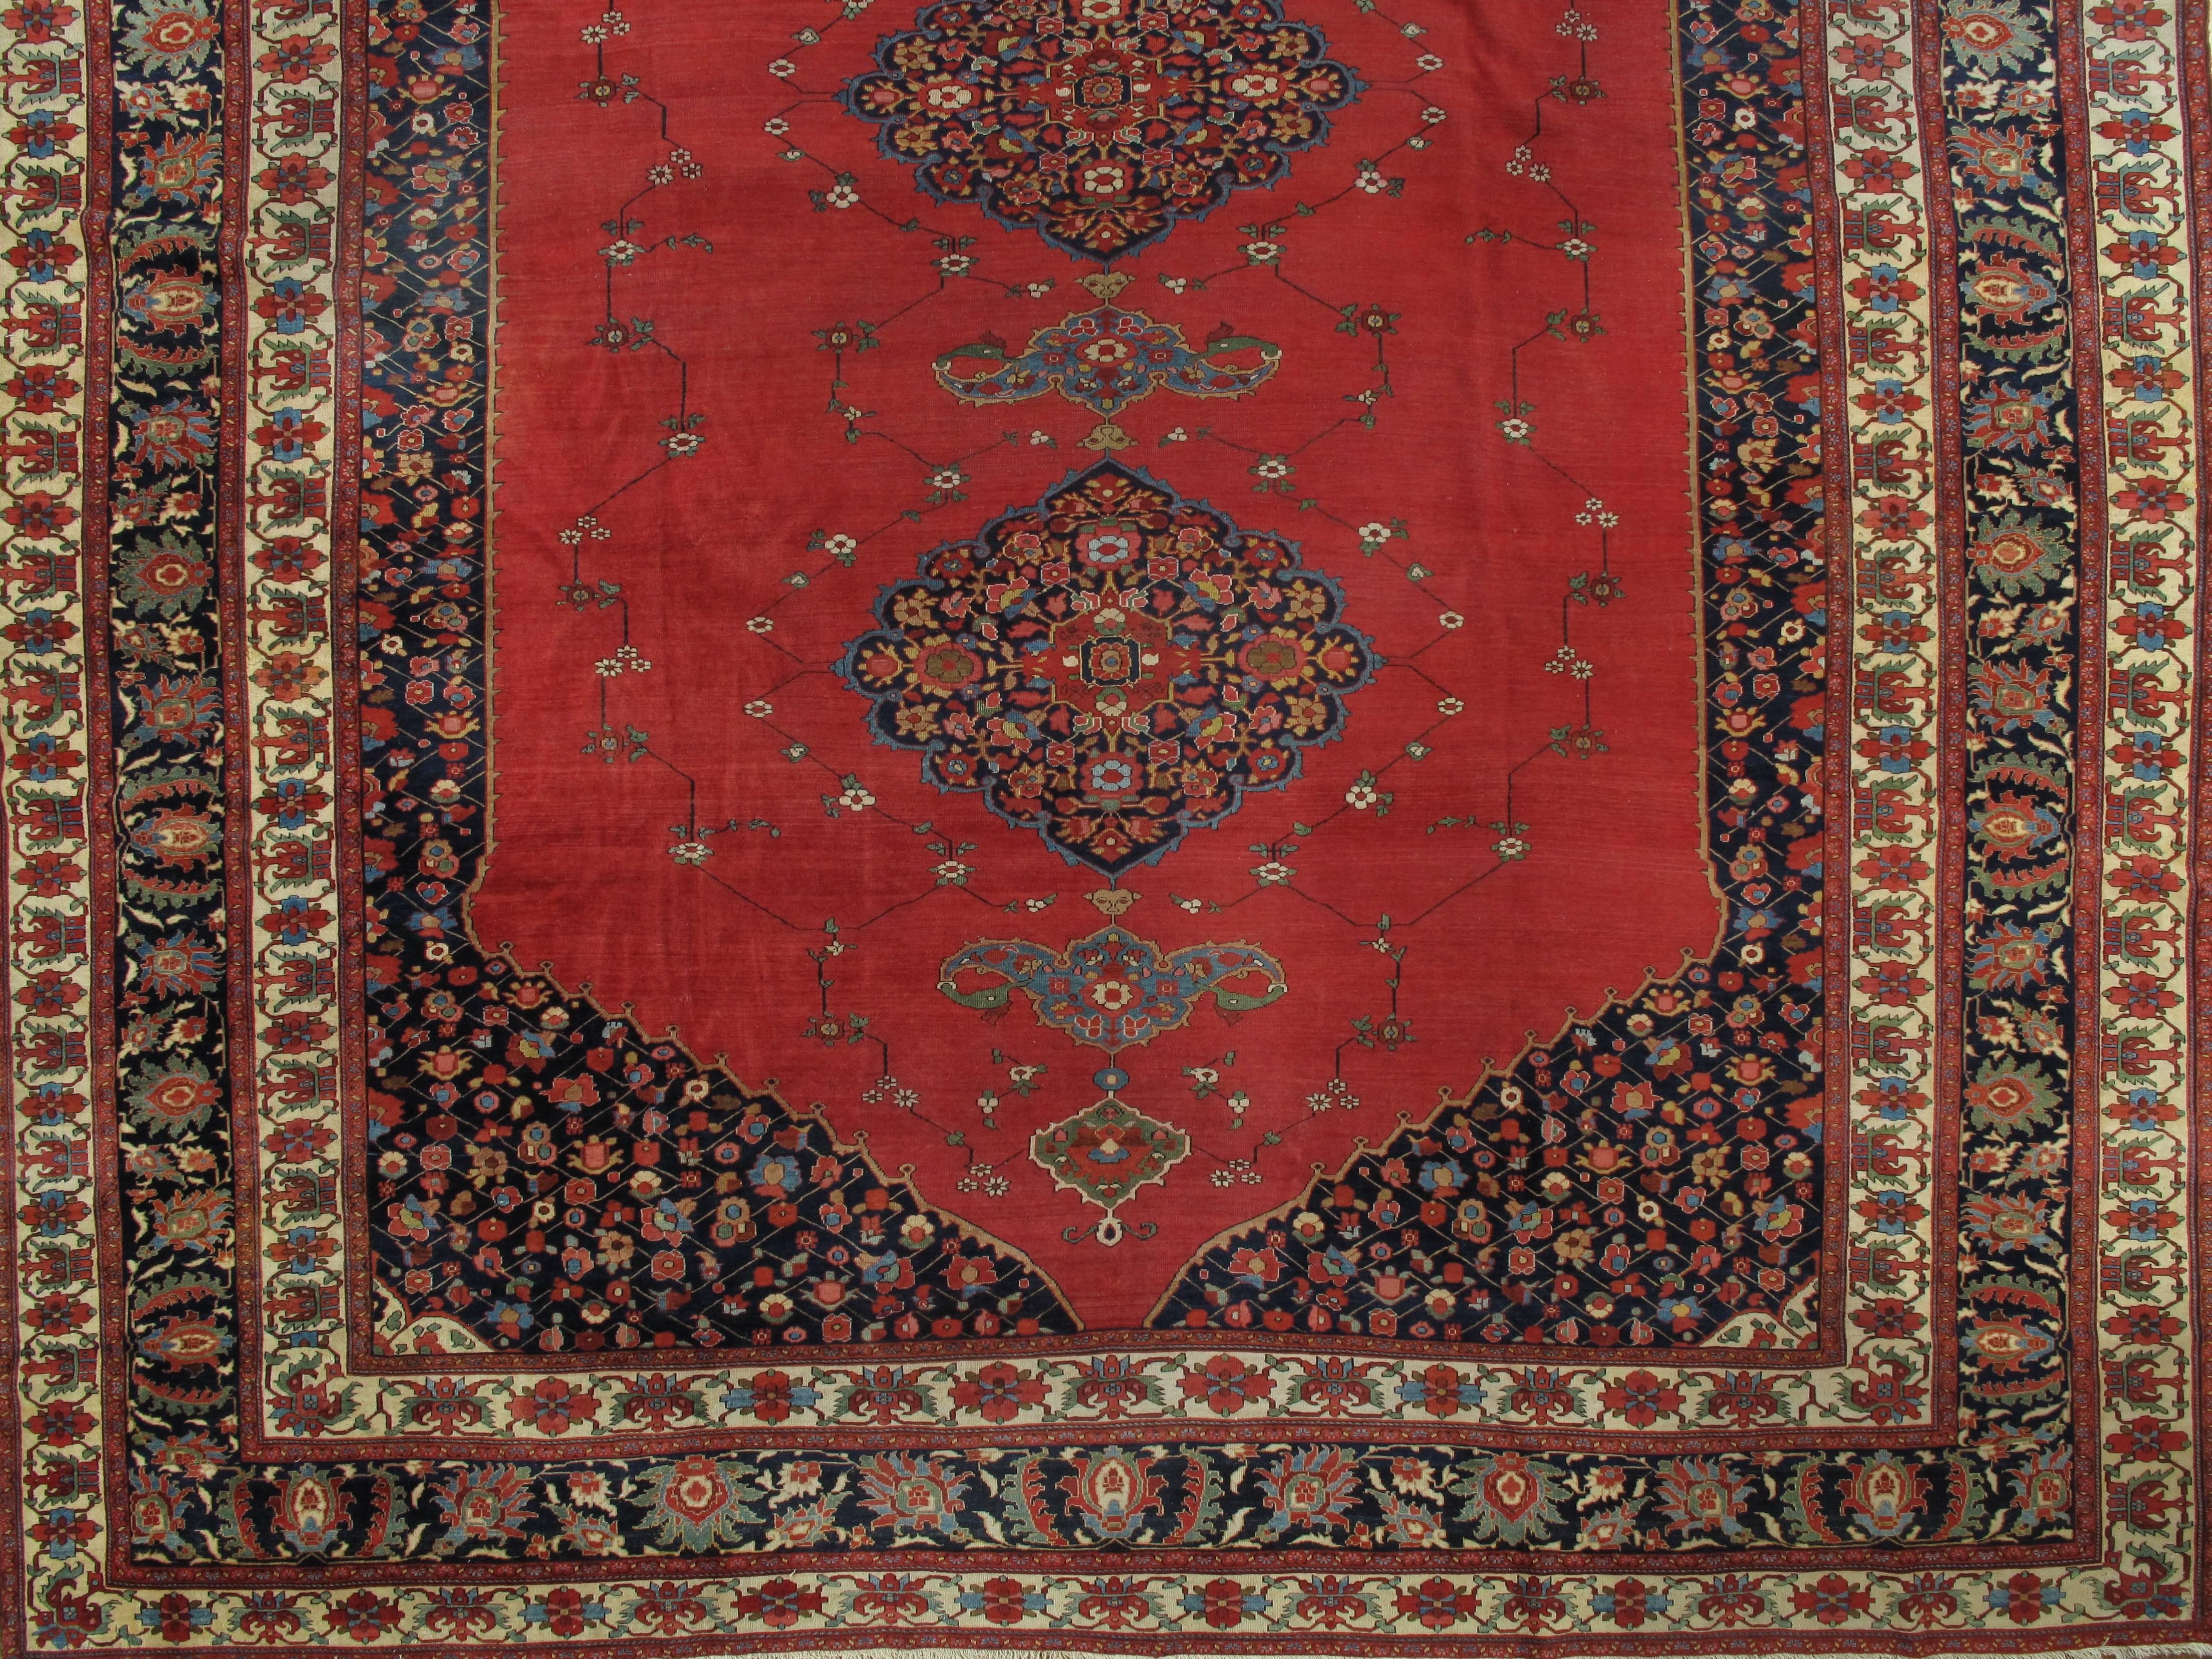 Finely woven Ferahan Sarouks were produced in the late 19th century until just before World War I. They've become extremely rare and are highly valued for their artistry and colors. This is a beautiful 19th century example. Size: 13'9